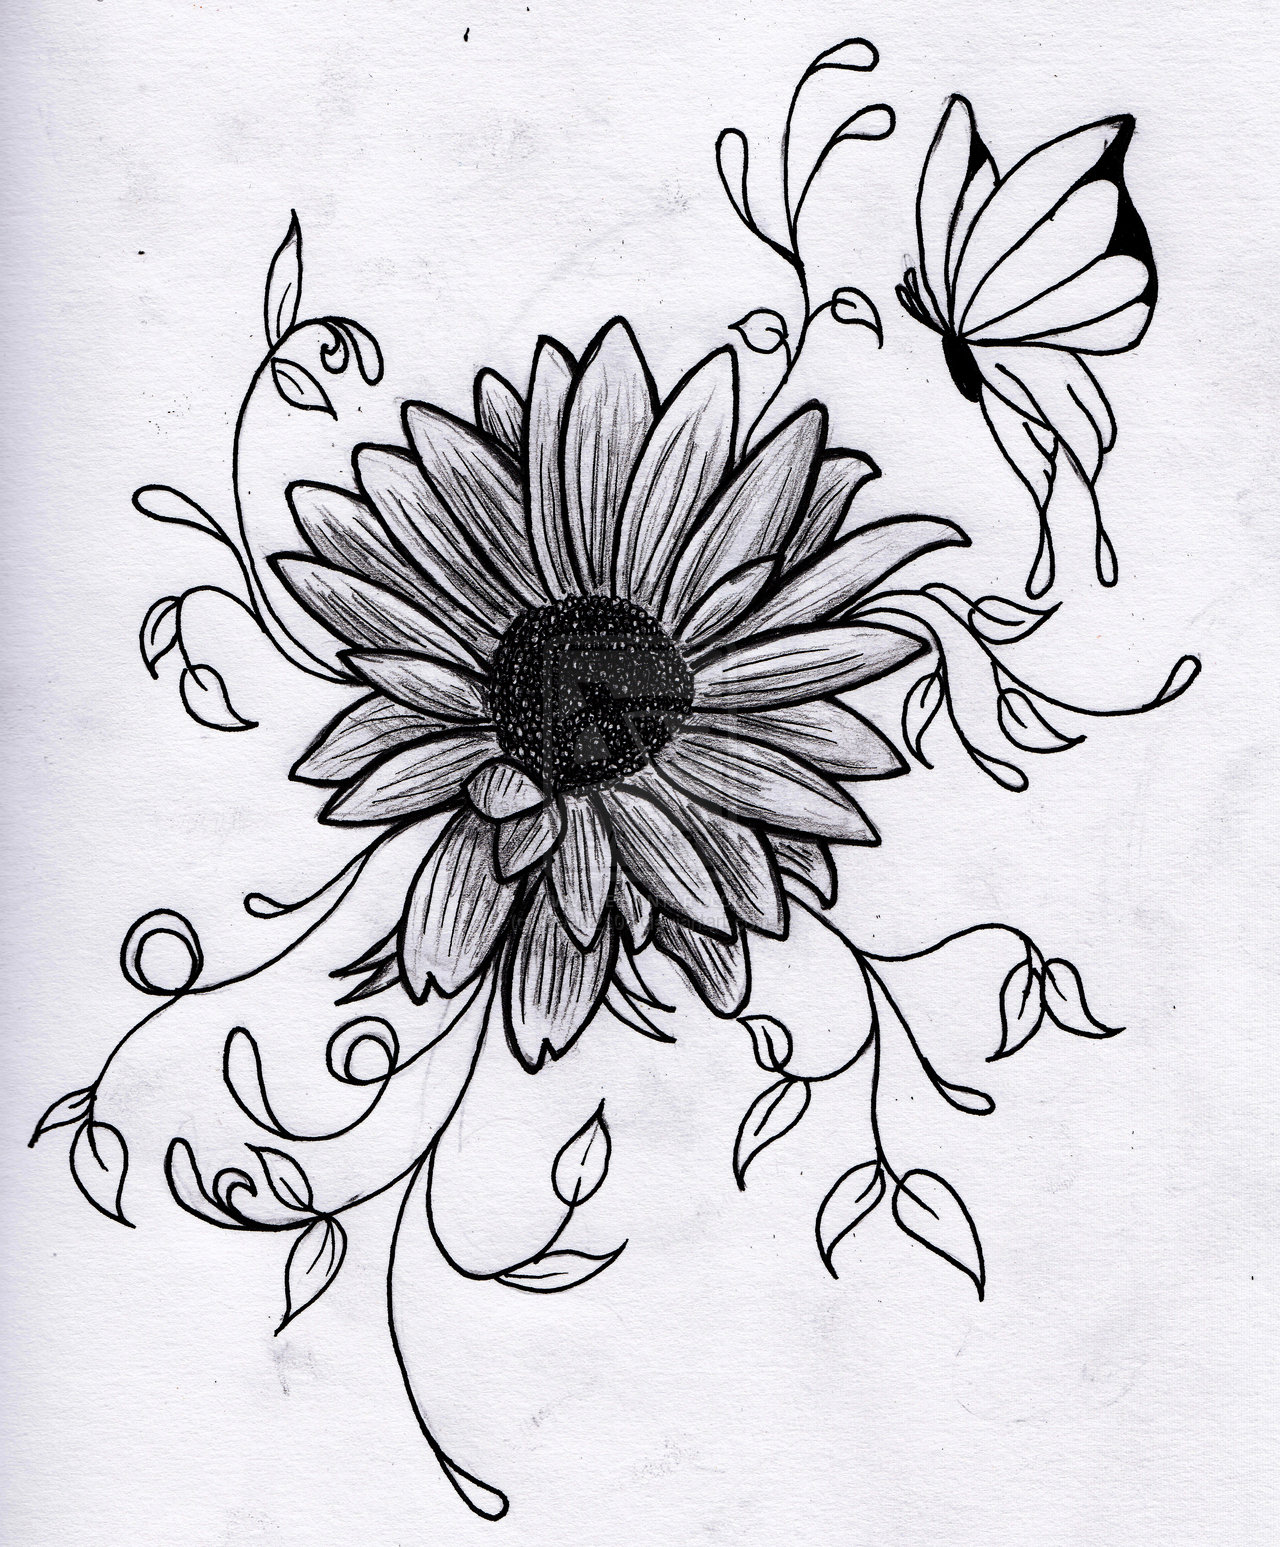 New Sketch Drawings Cute Flower with simple drawing